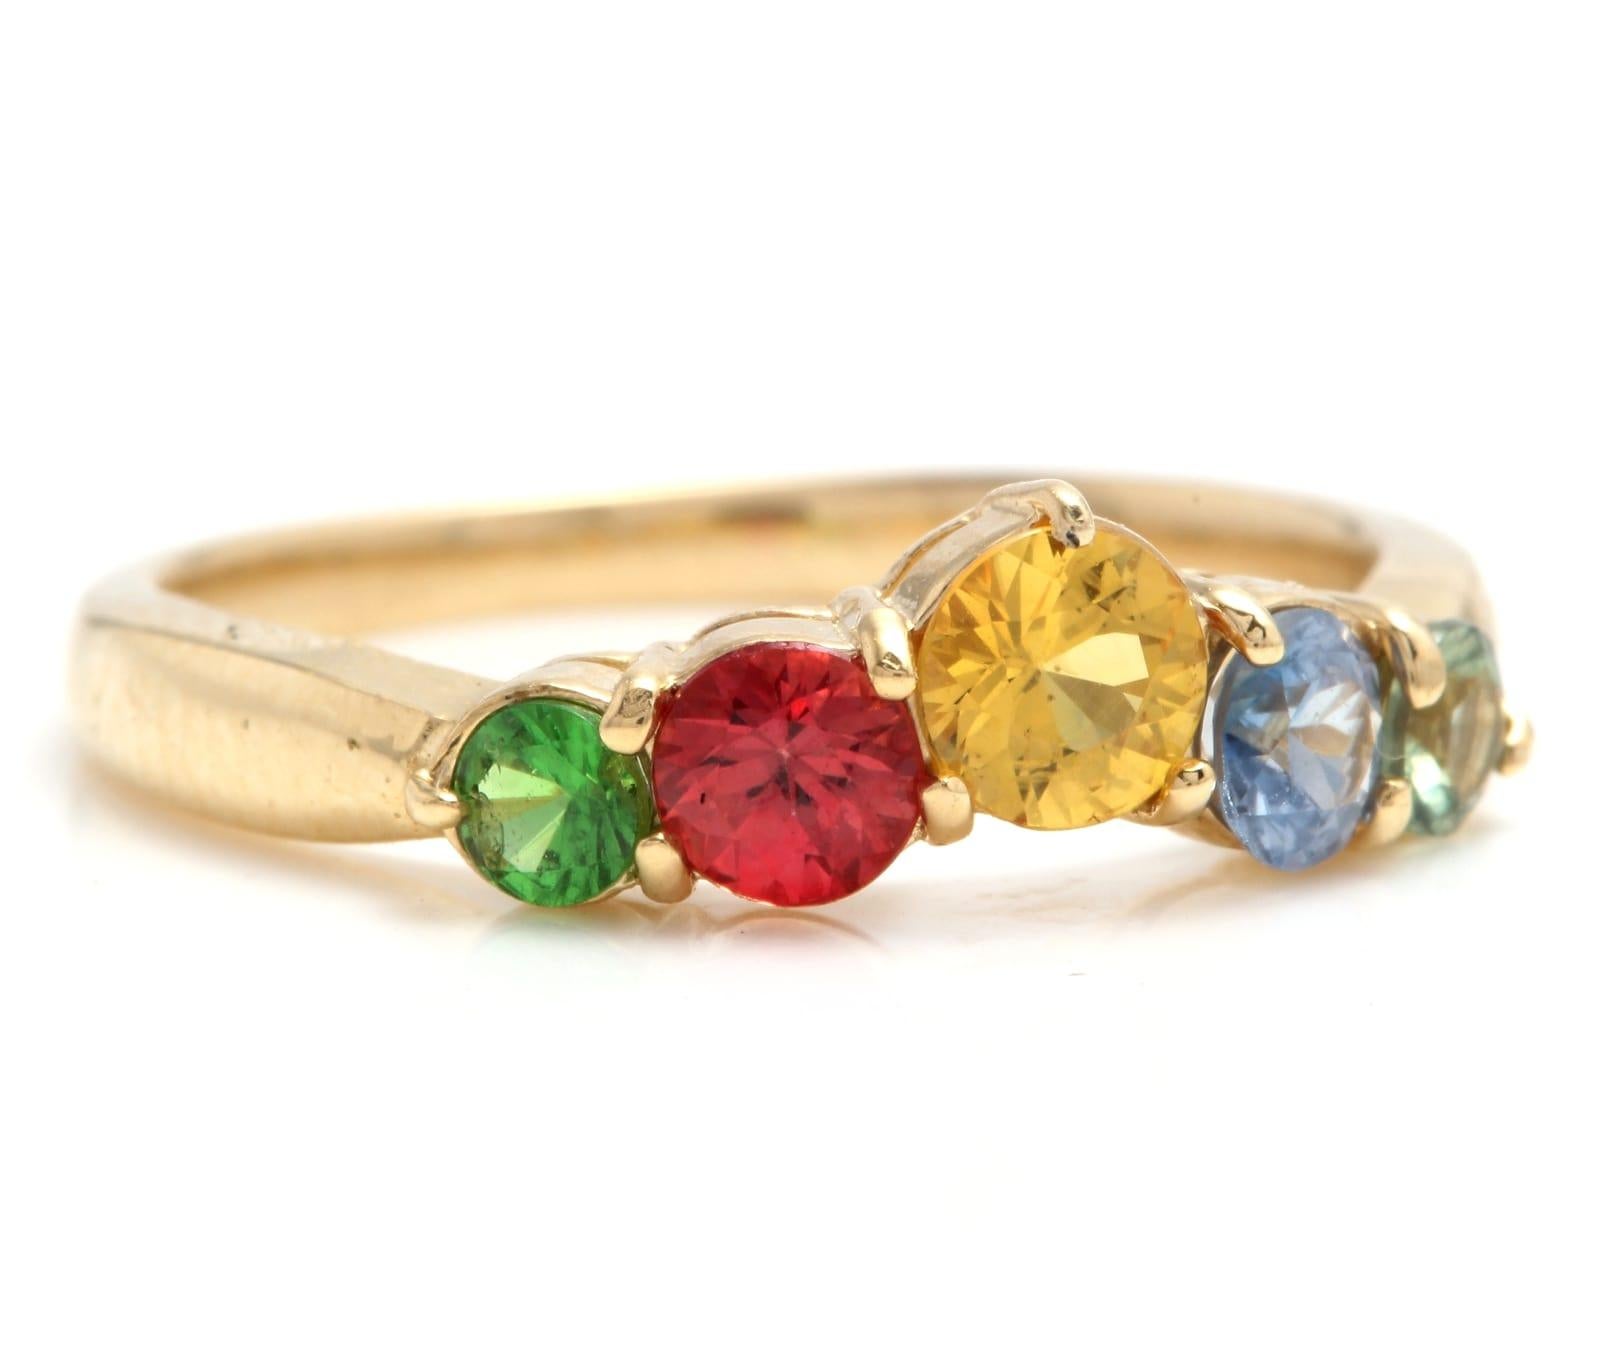 1.00 Carats Exquisite Natural Multi-Color Sapphire 14K Solid Yellow Gold Ring

Total Natural Multi-Color Sapphires Weight: Approx. 1.00 Carat (Heated)

Center Yellow Sapphire Measures: 4.00mm

Ring size: 5.5 (we offer free re-sizing upon